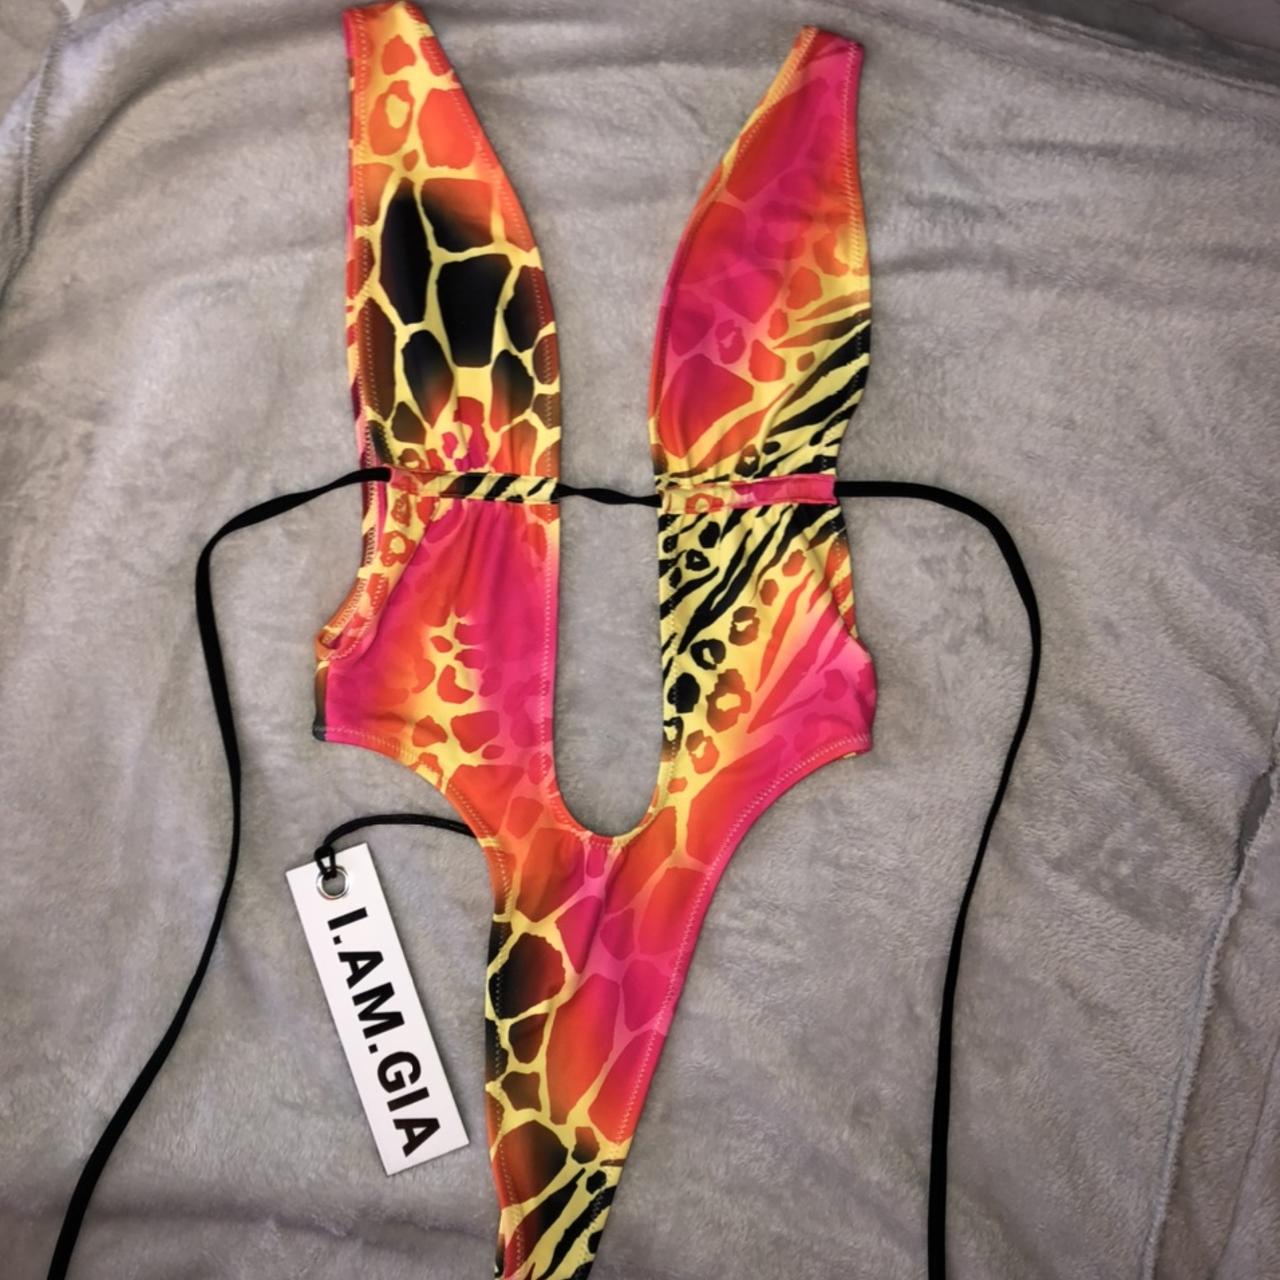 I.AM.GIA Women's Pink and Yellow Swimsuit-one-piece | Depop